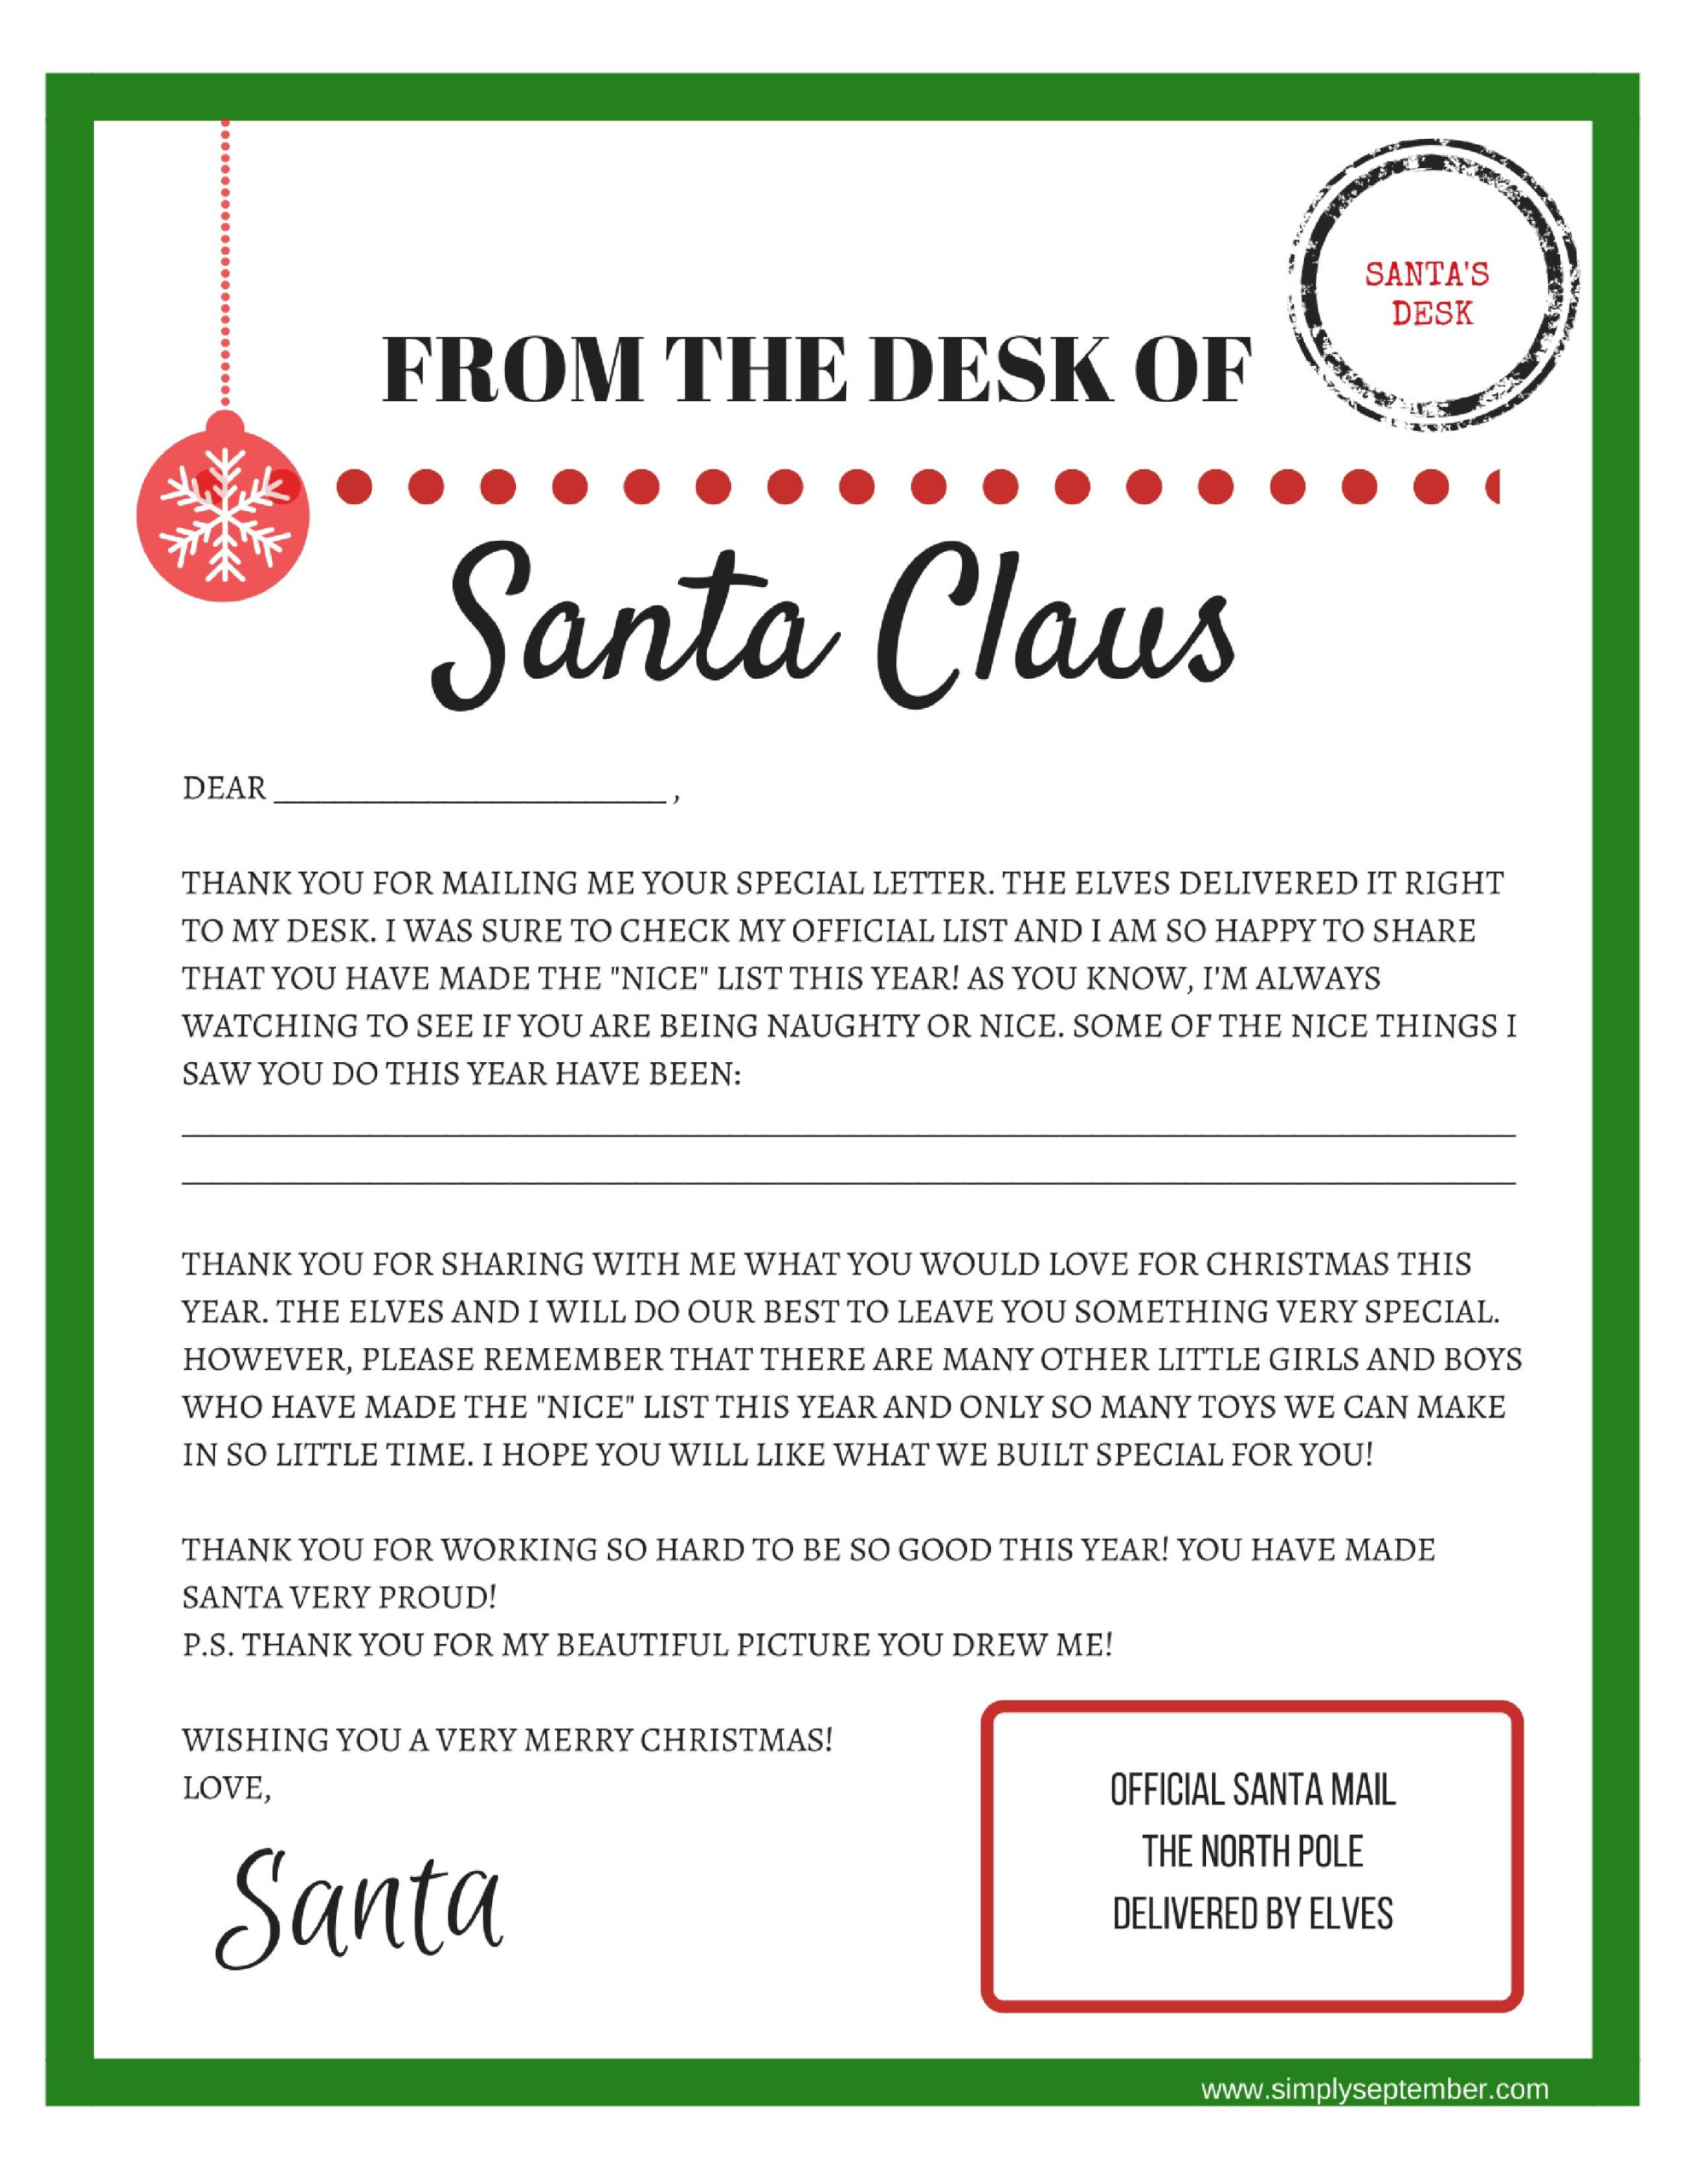 Letters To And From Santa: Free Printables - Simply September intended for Free Printable Letter From Santa Template